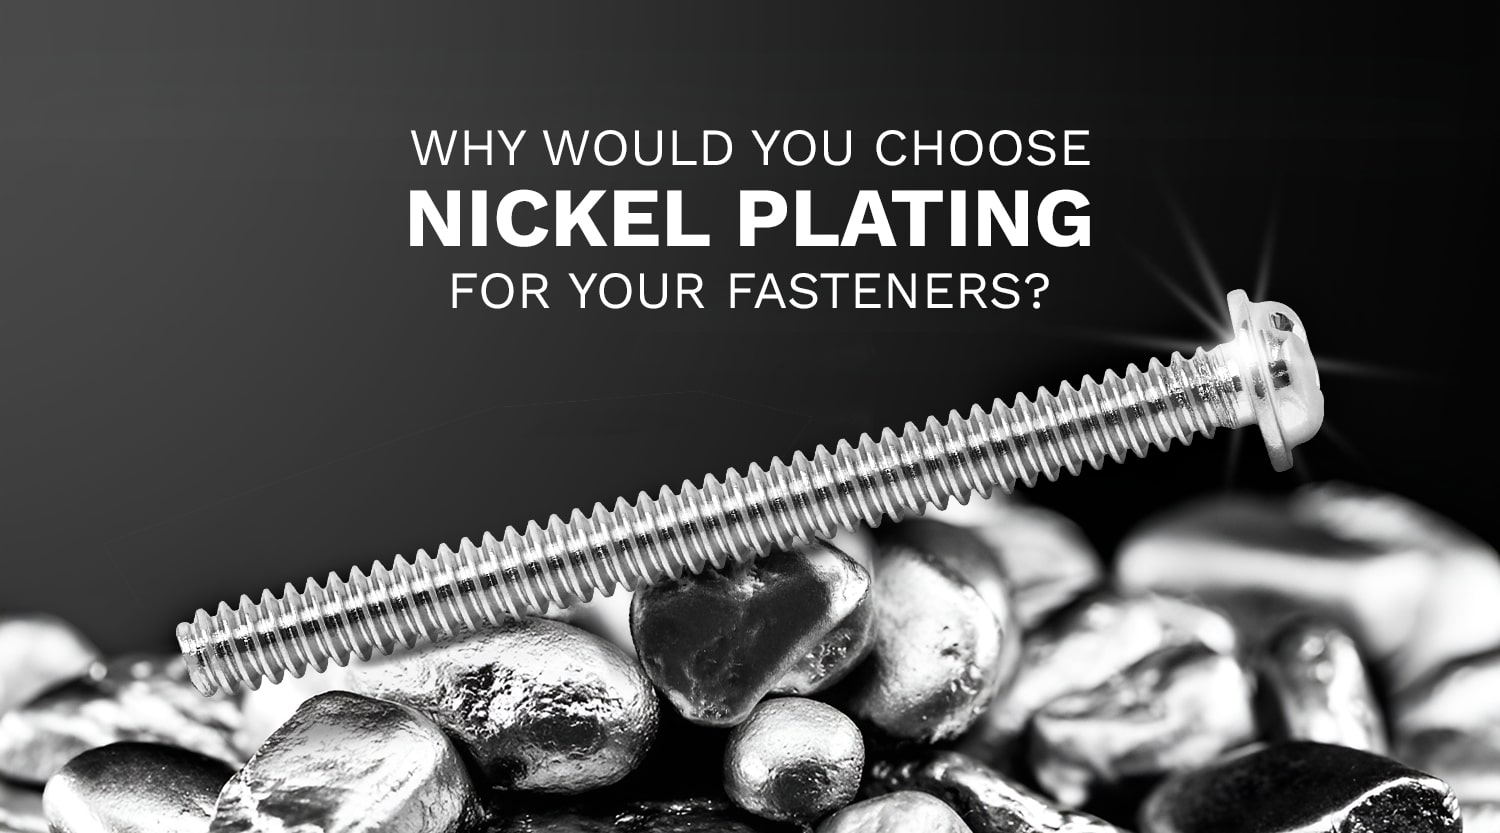 Why Would You Choose Nickel Plating For Your Fasteners?